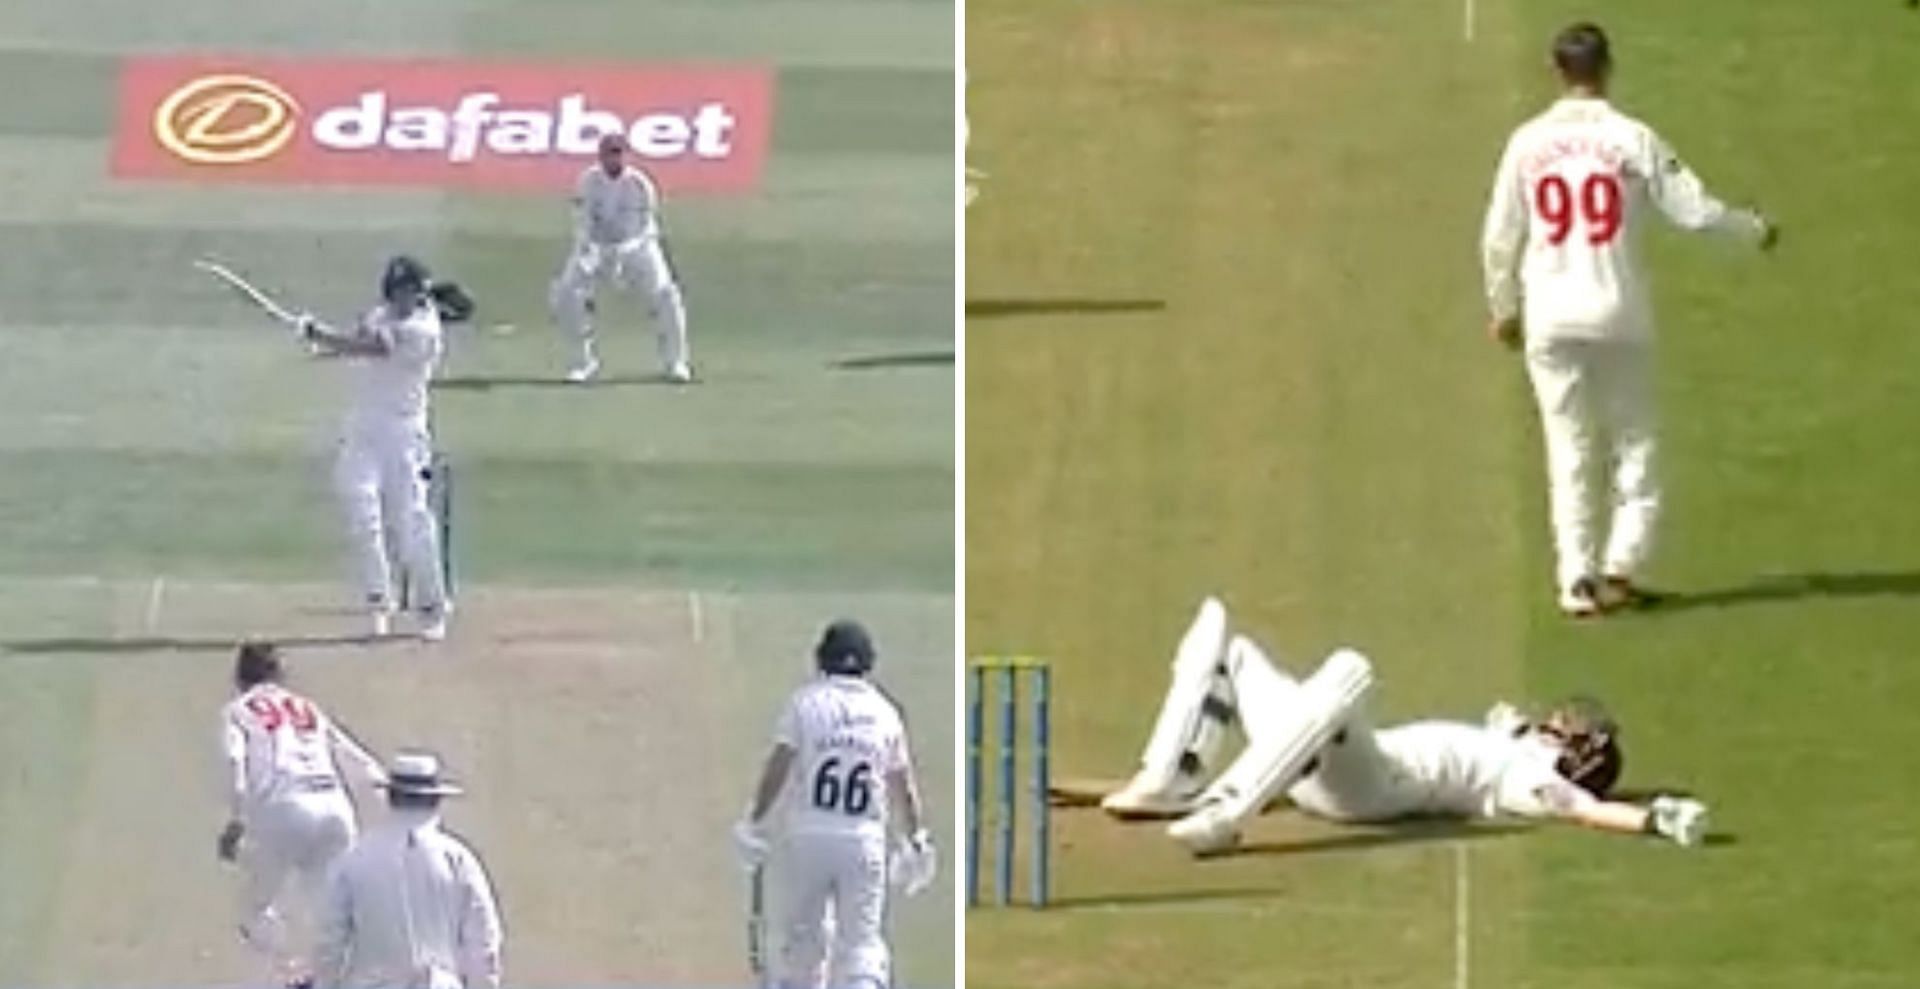 Ben Stokes floored after getting hit on the box (Credit: Twitter)